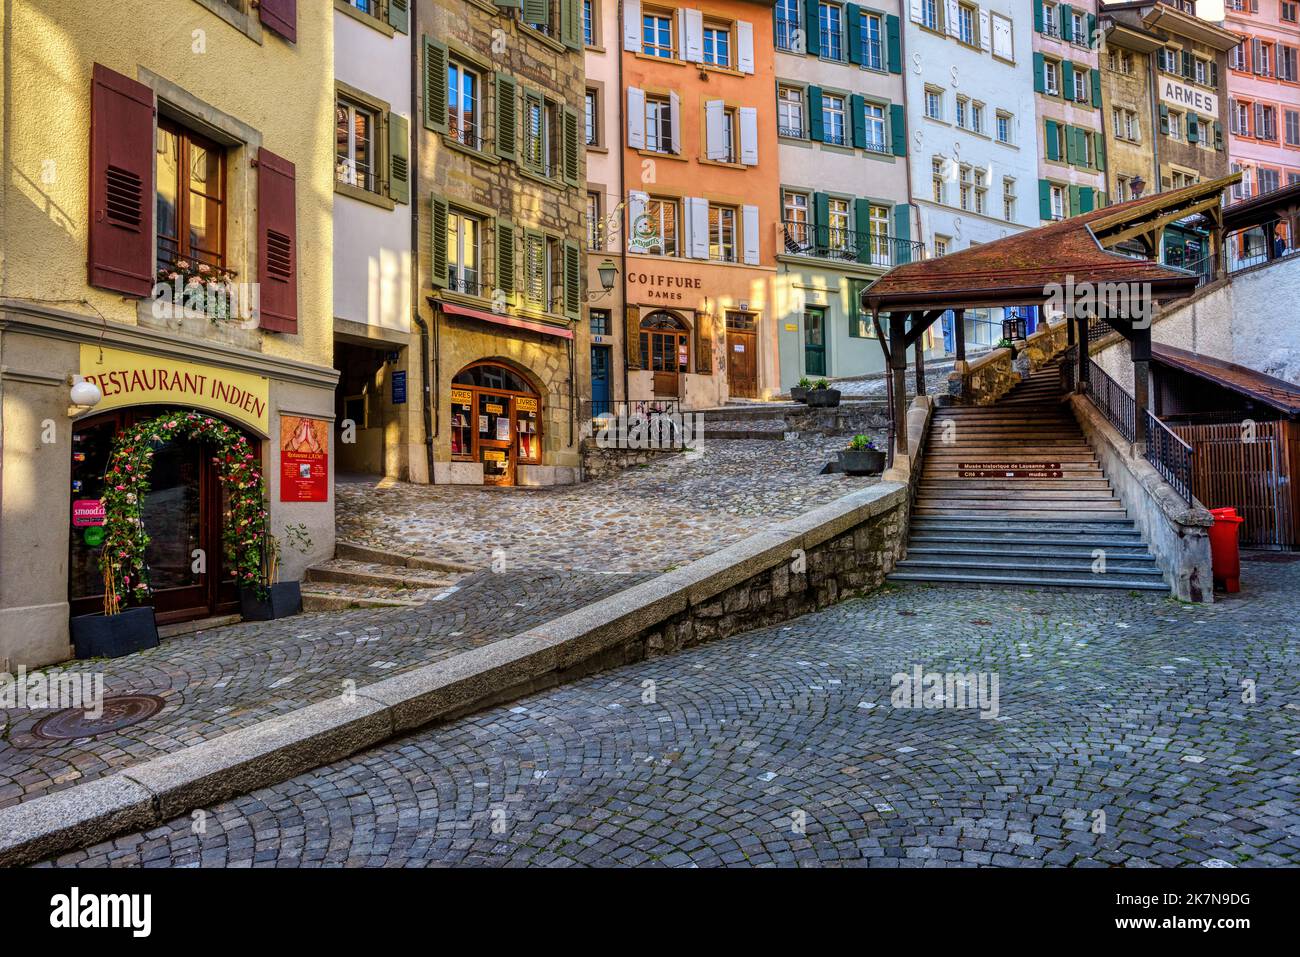 Lausanne, Switzerland - 12 April 2021: Picturesque Escaliers du Marche covered staircase in the Old town center is one of the main landmarks in Lausan Stock Photo